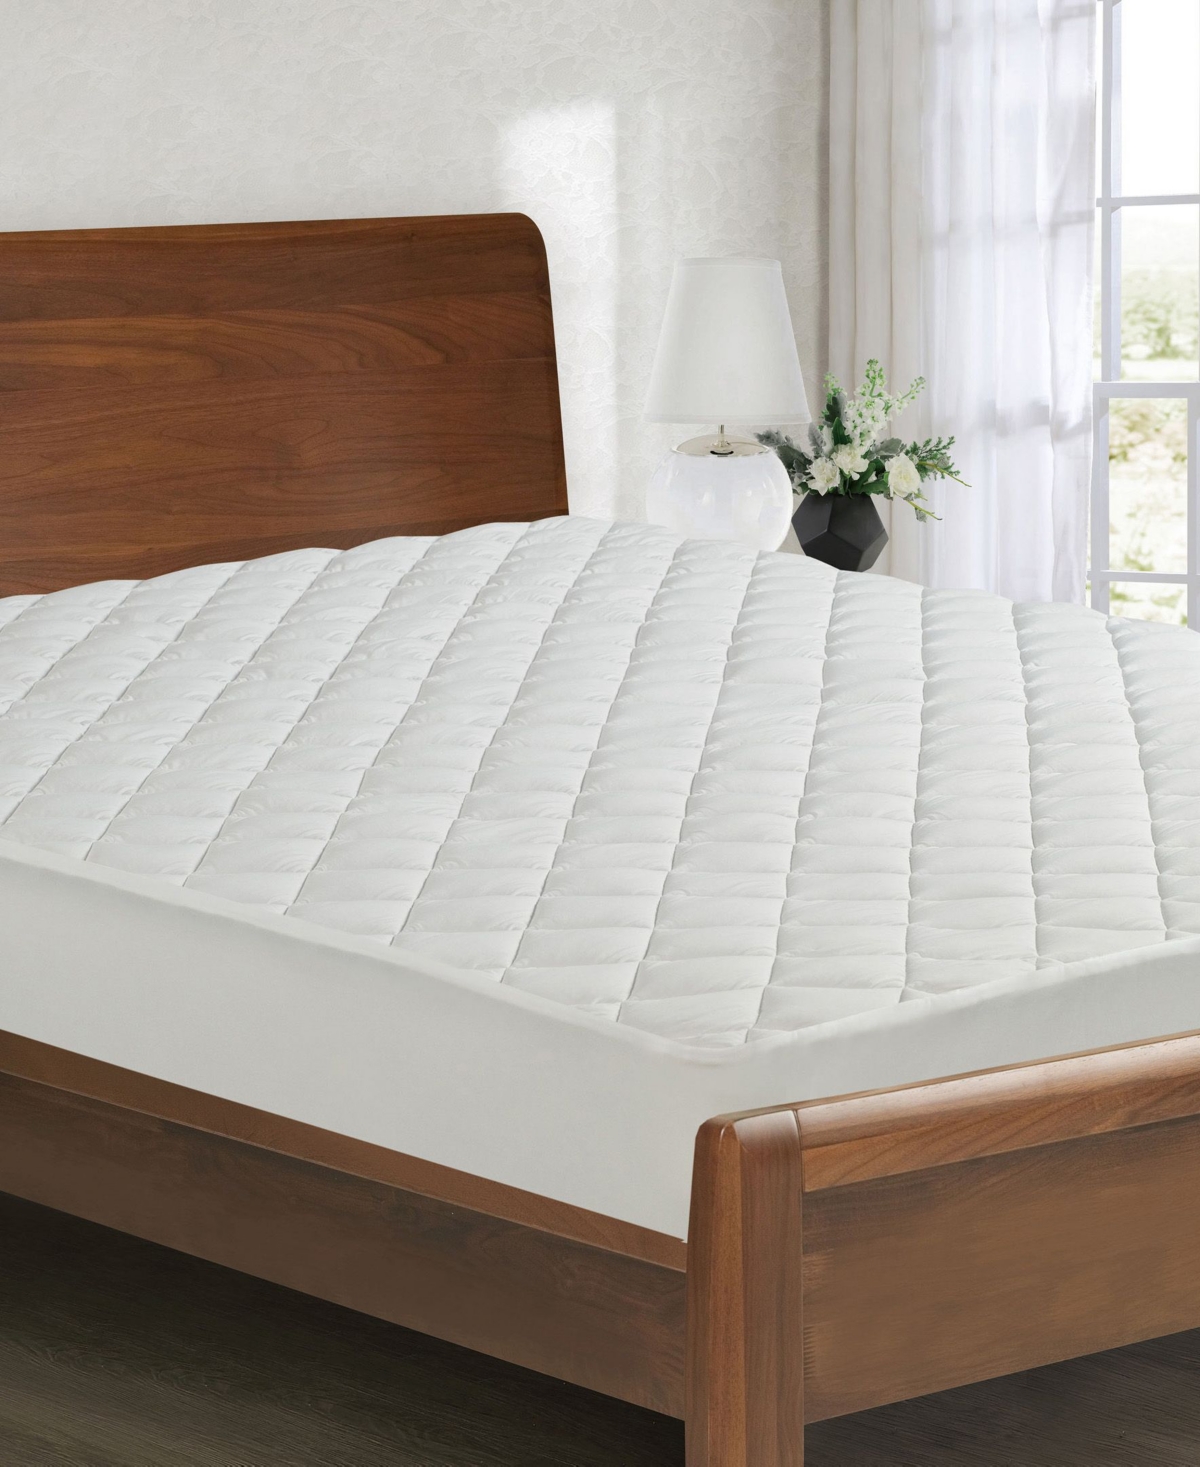 All-In-One Performance Stretch Moisture Wicking Fitted Mattress Pad, Queen